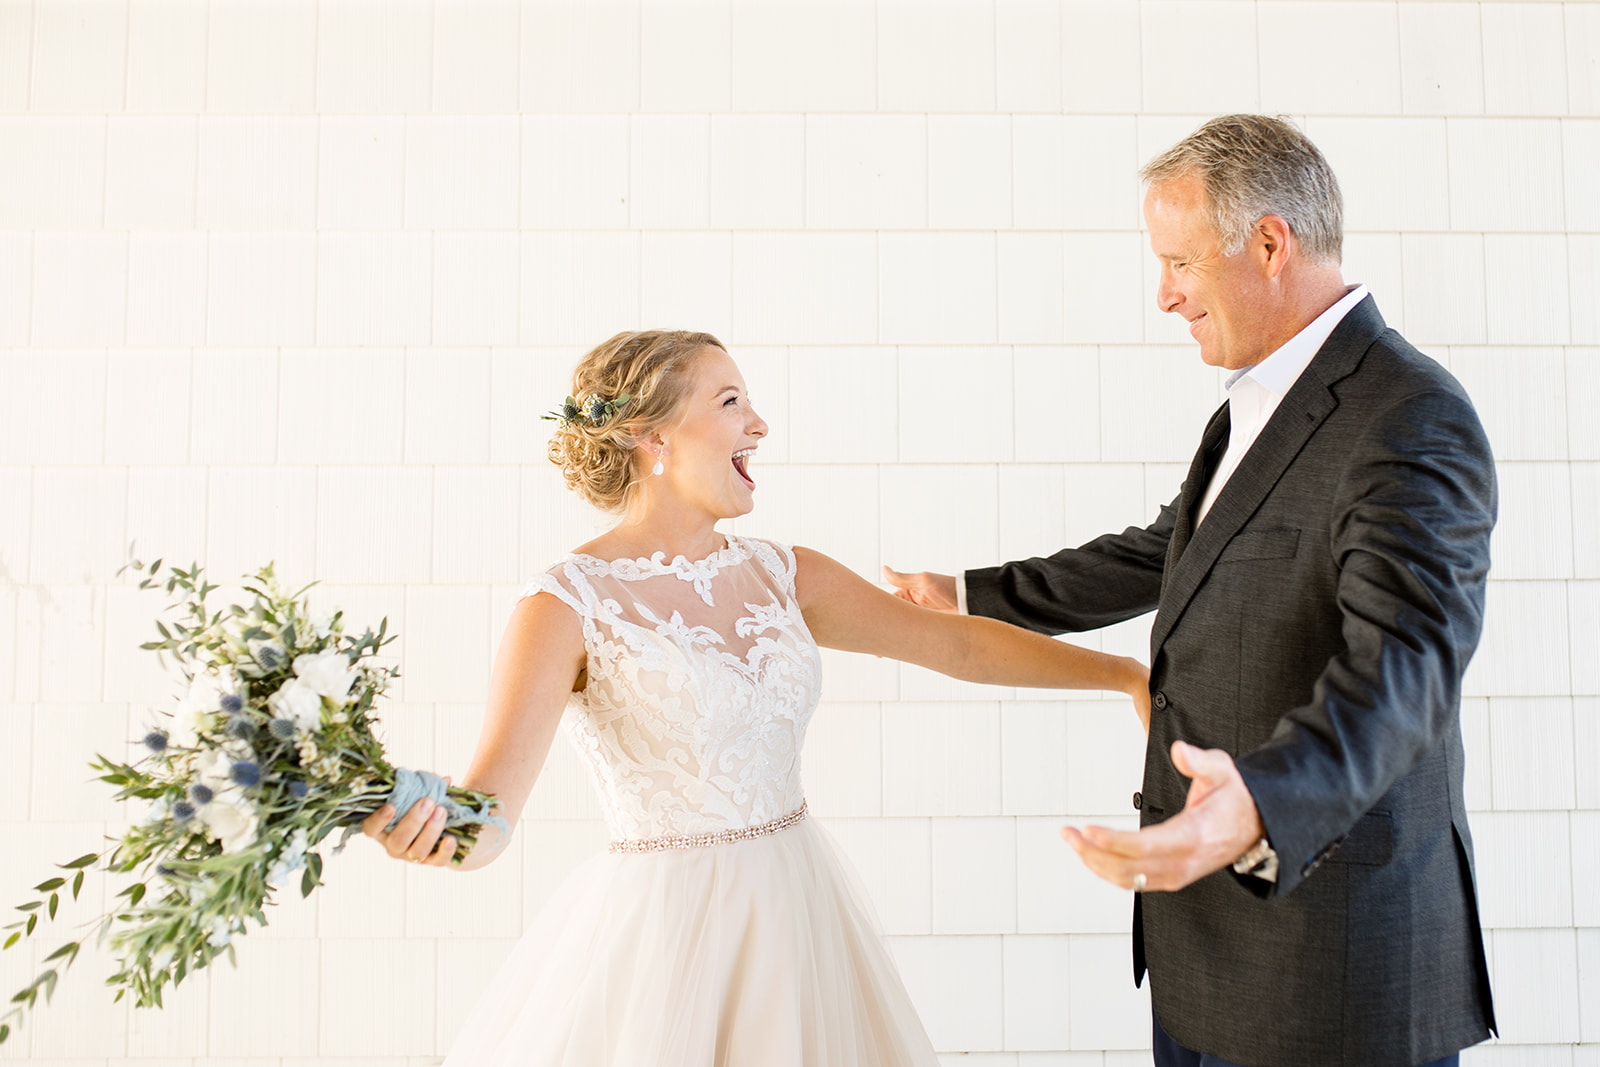 How To Make Your Parents Feel Special on Your Wedding Day - Image Property of www.j-dphoto.com